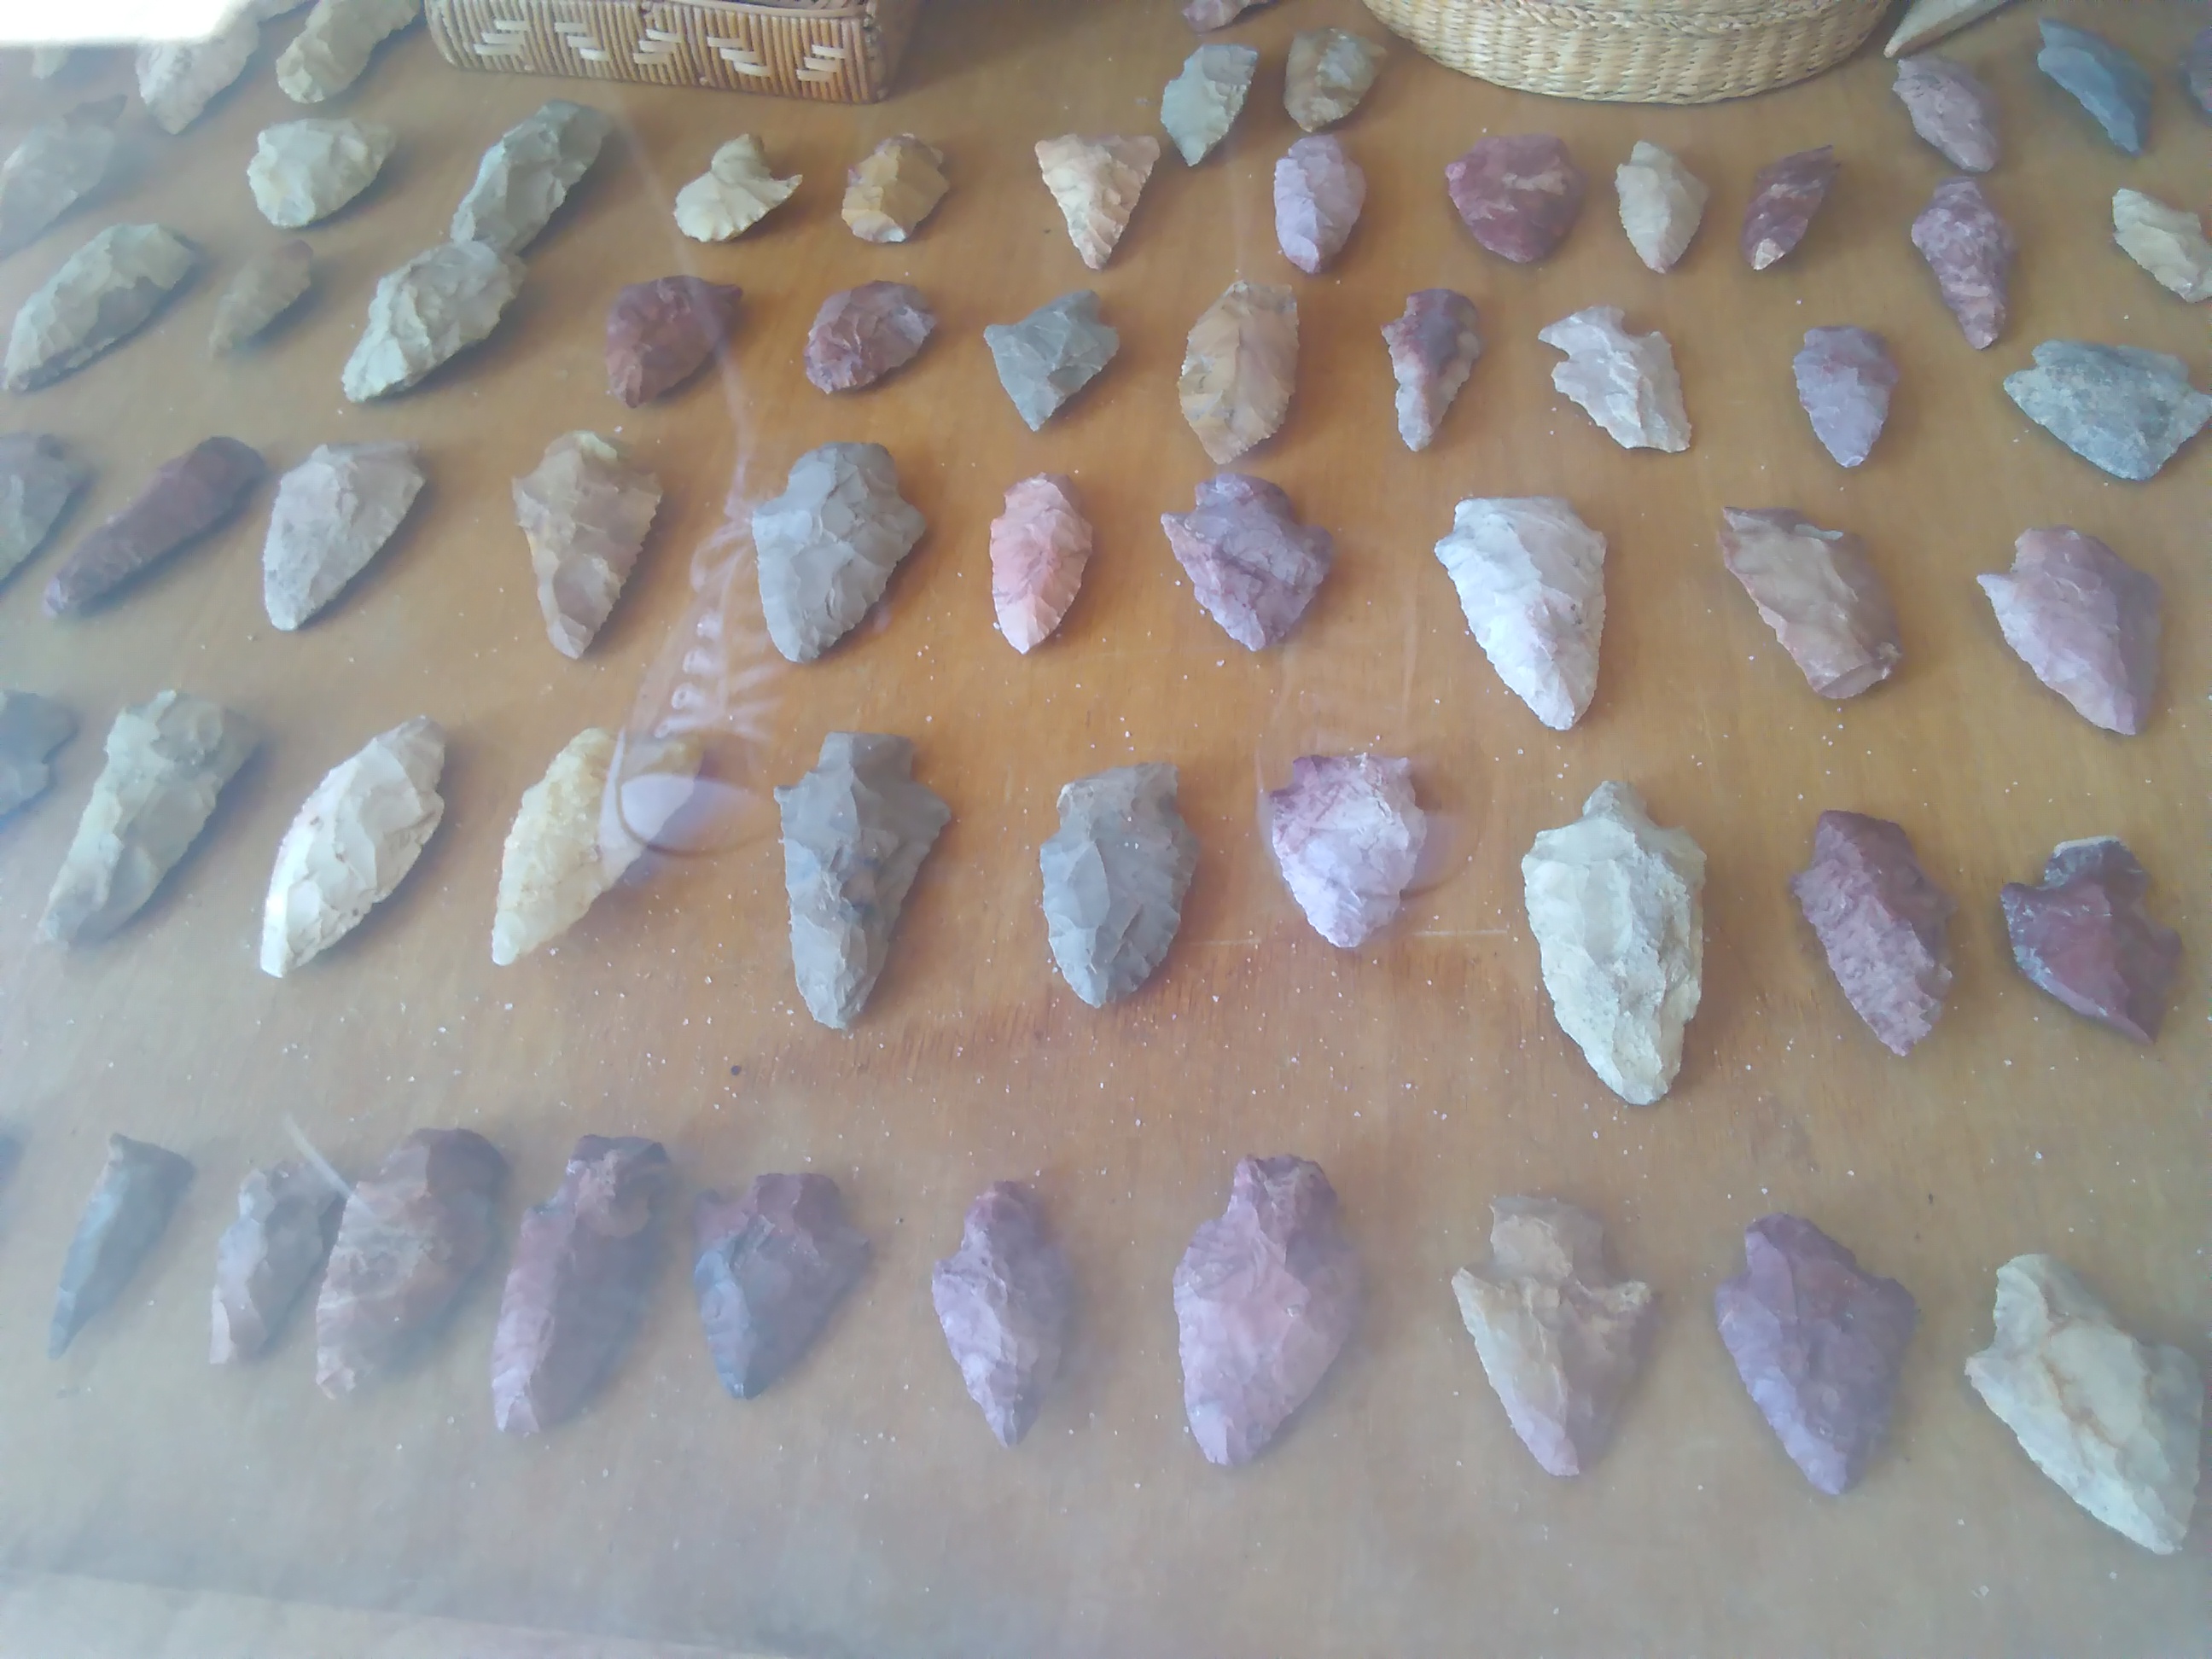 arrowheads in a vitrine at Culpepper's Automotive, Poplarville, MS